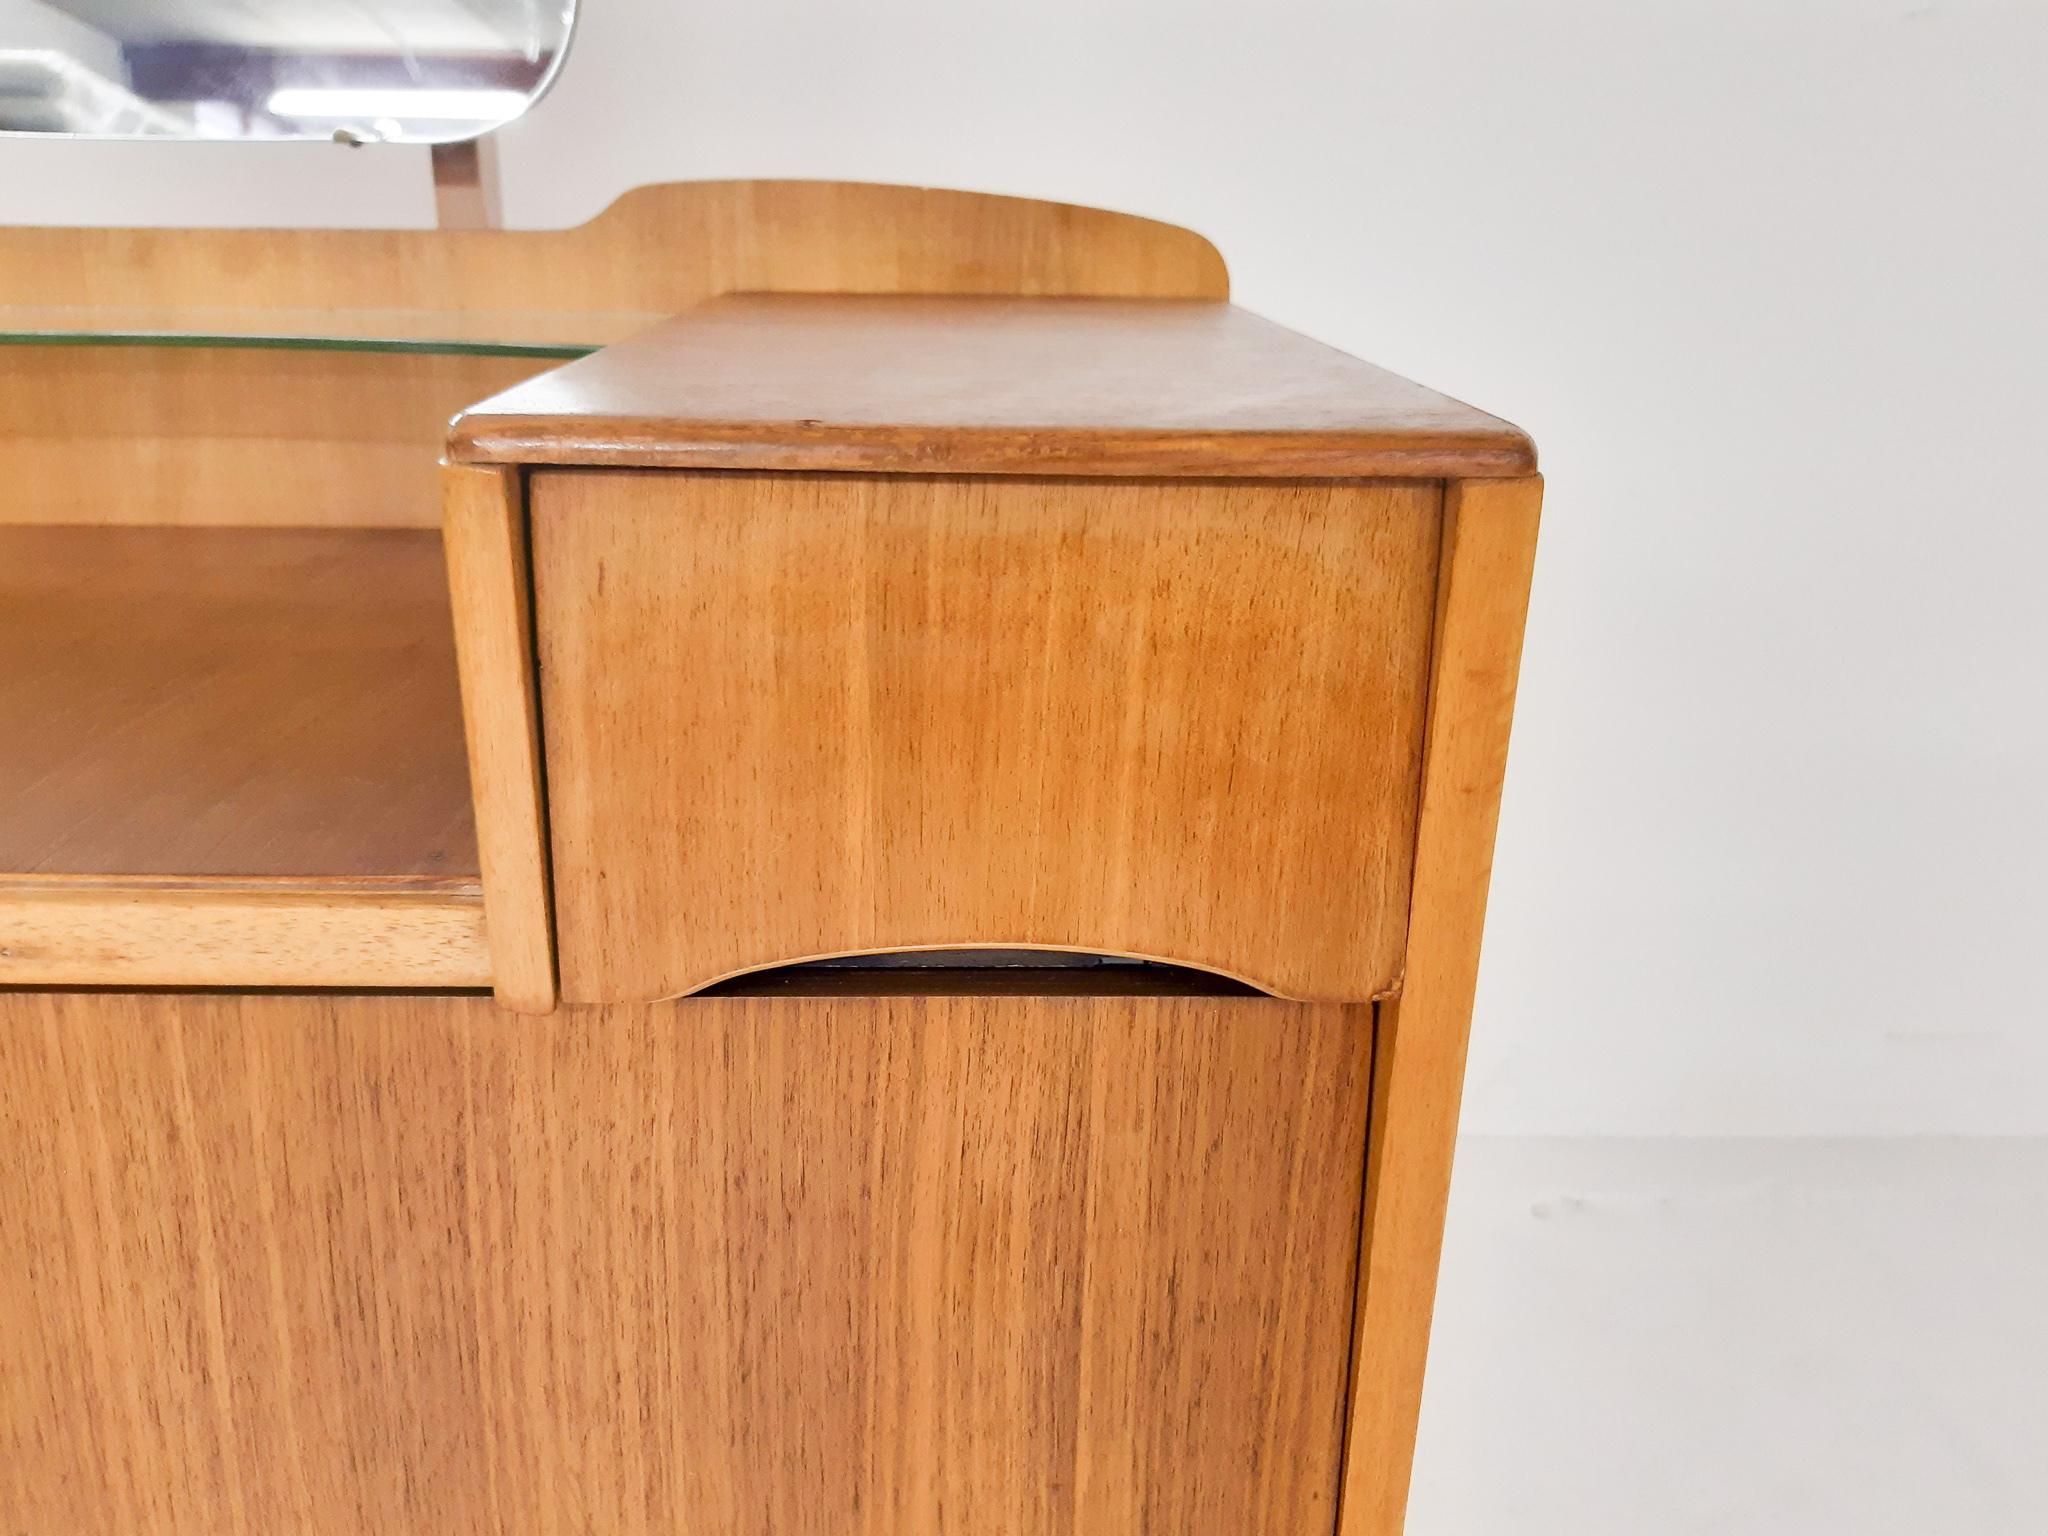 Mid-20th Century Small Dressing Table or Vanity by Gunther Hoffstead for Uniflex, U.K. 1960s For Sale